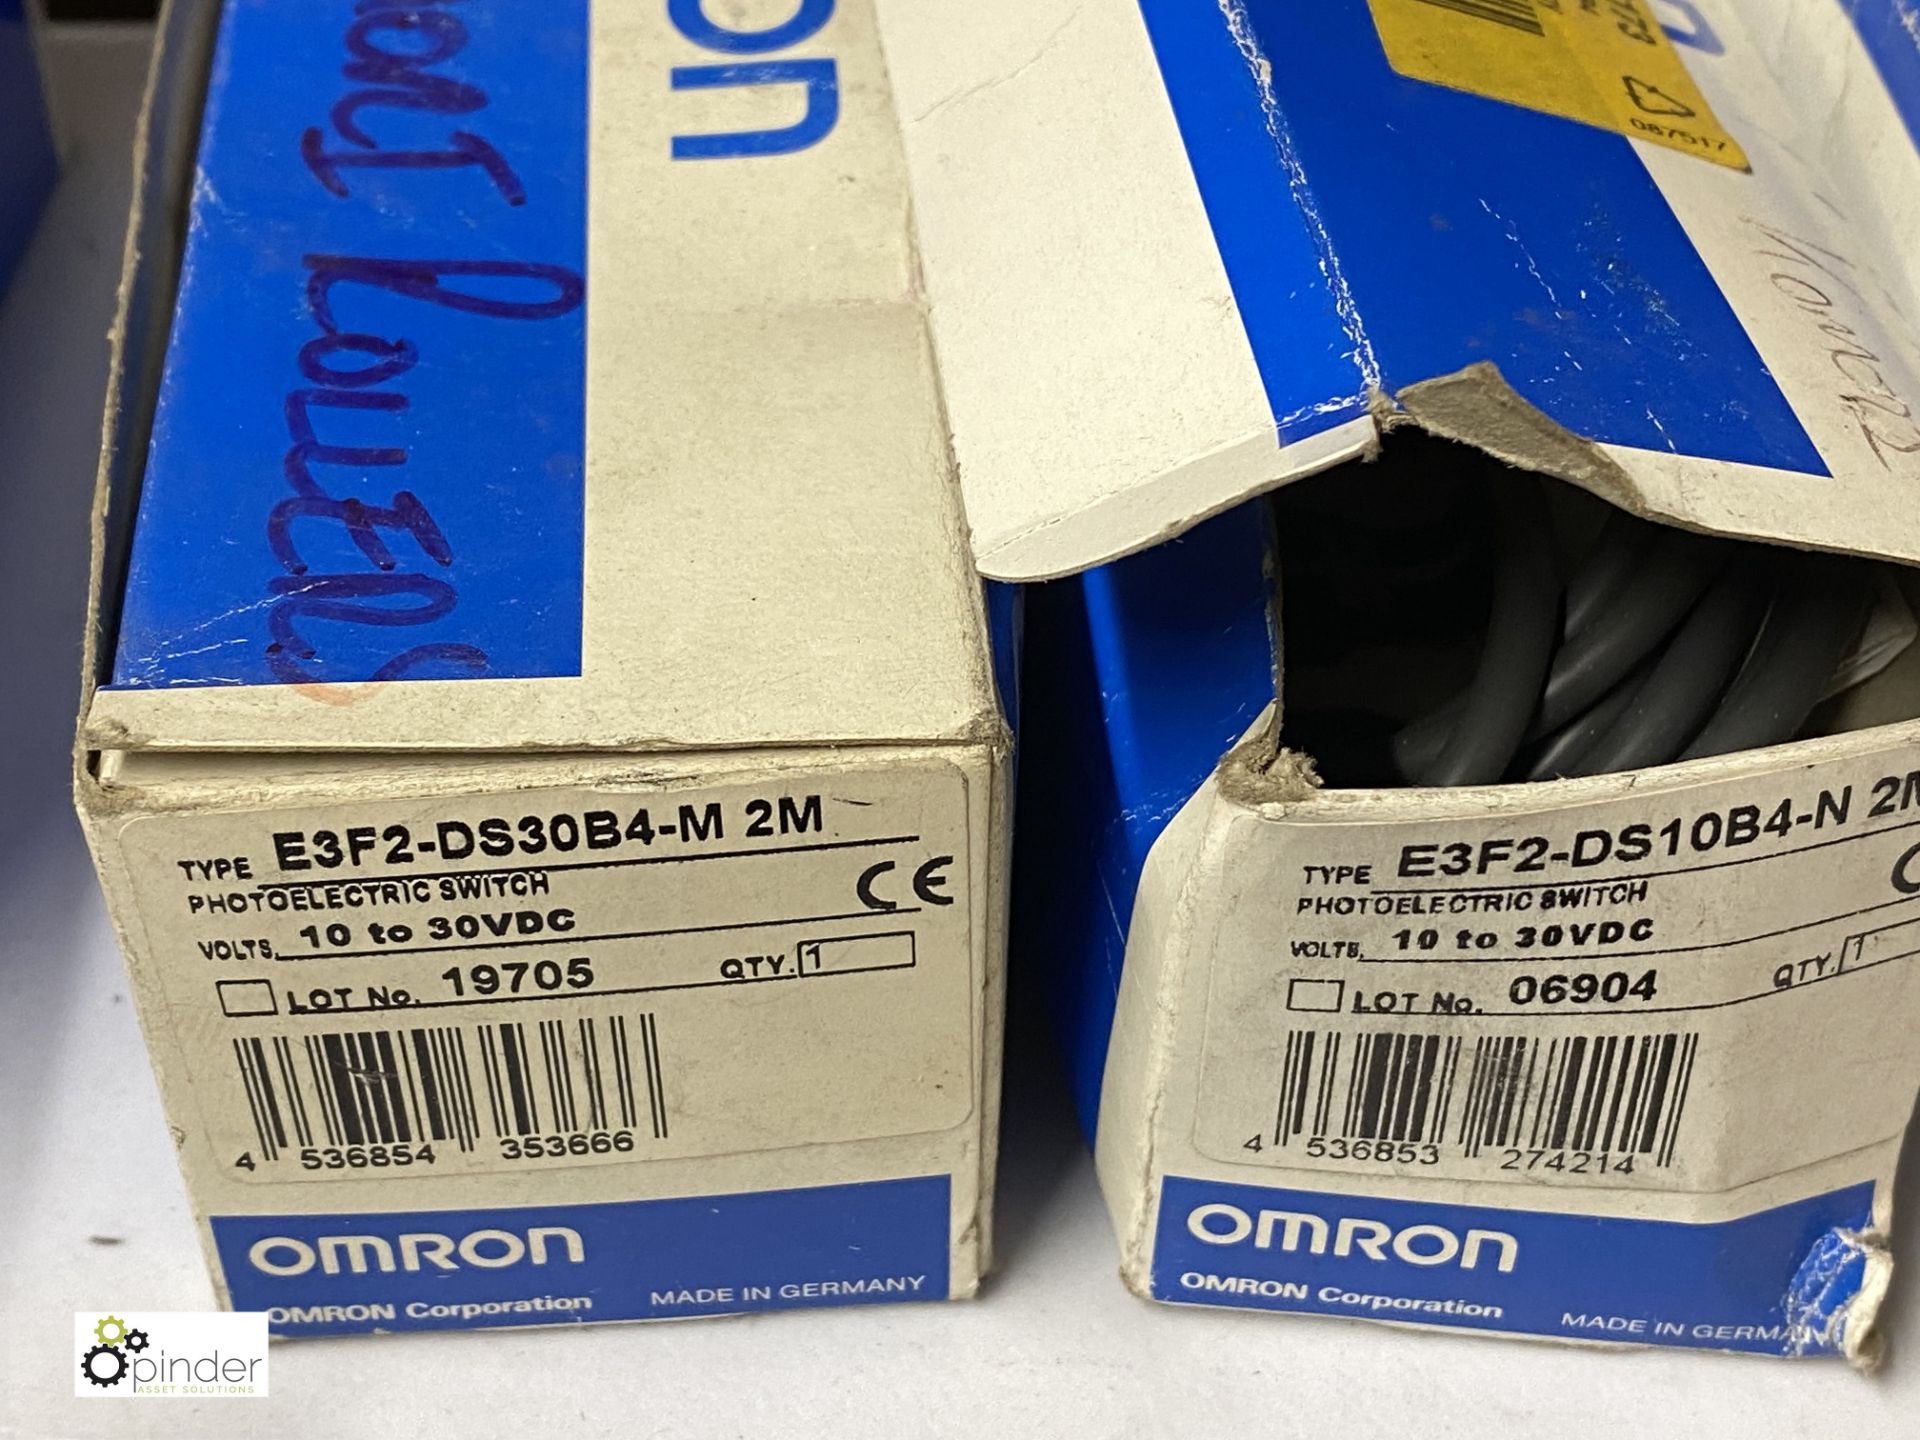 4 Omron Photoelectric Switches - Image 2 of 3